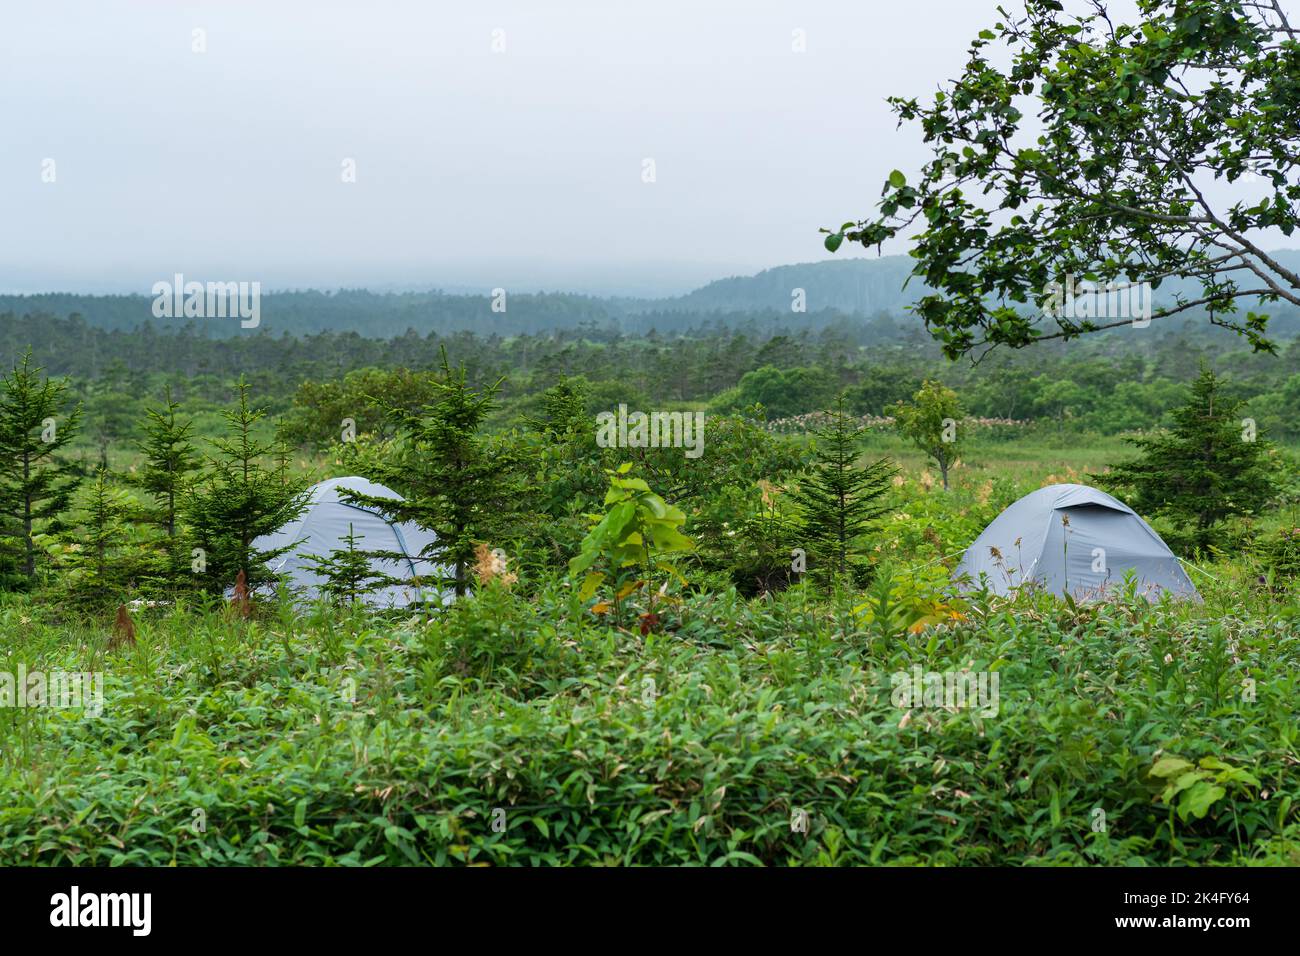 tourist tent among the grass in a cloudy valley Stock Photo